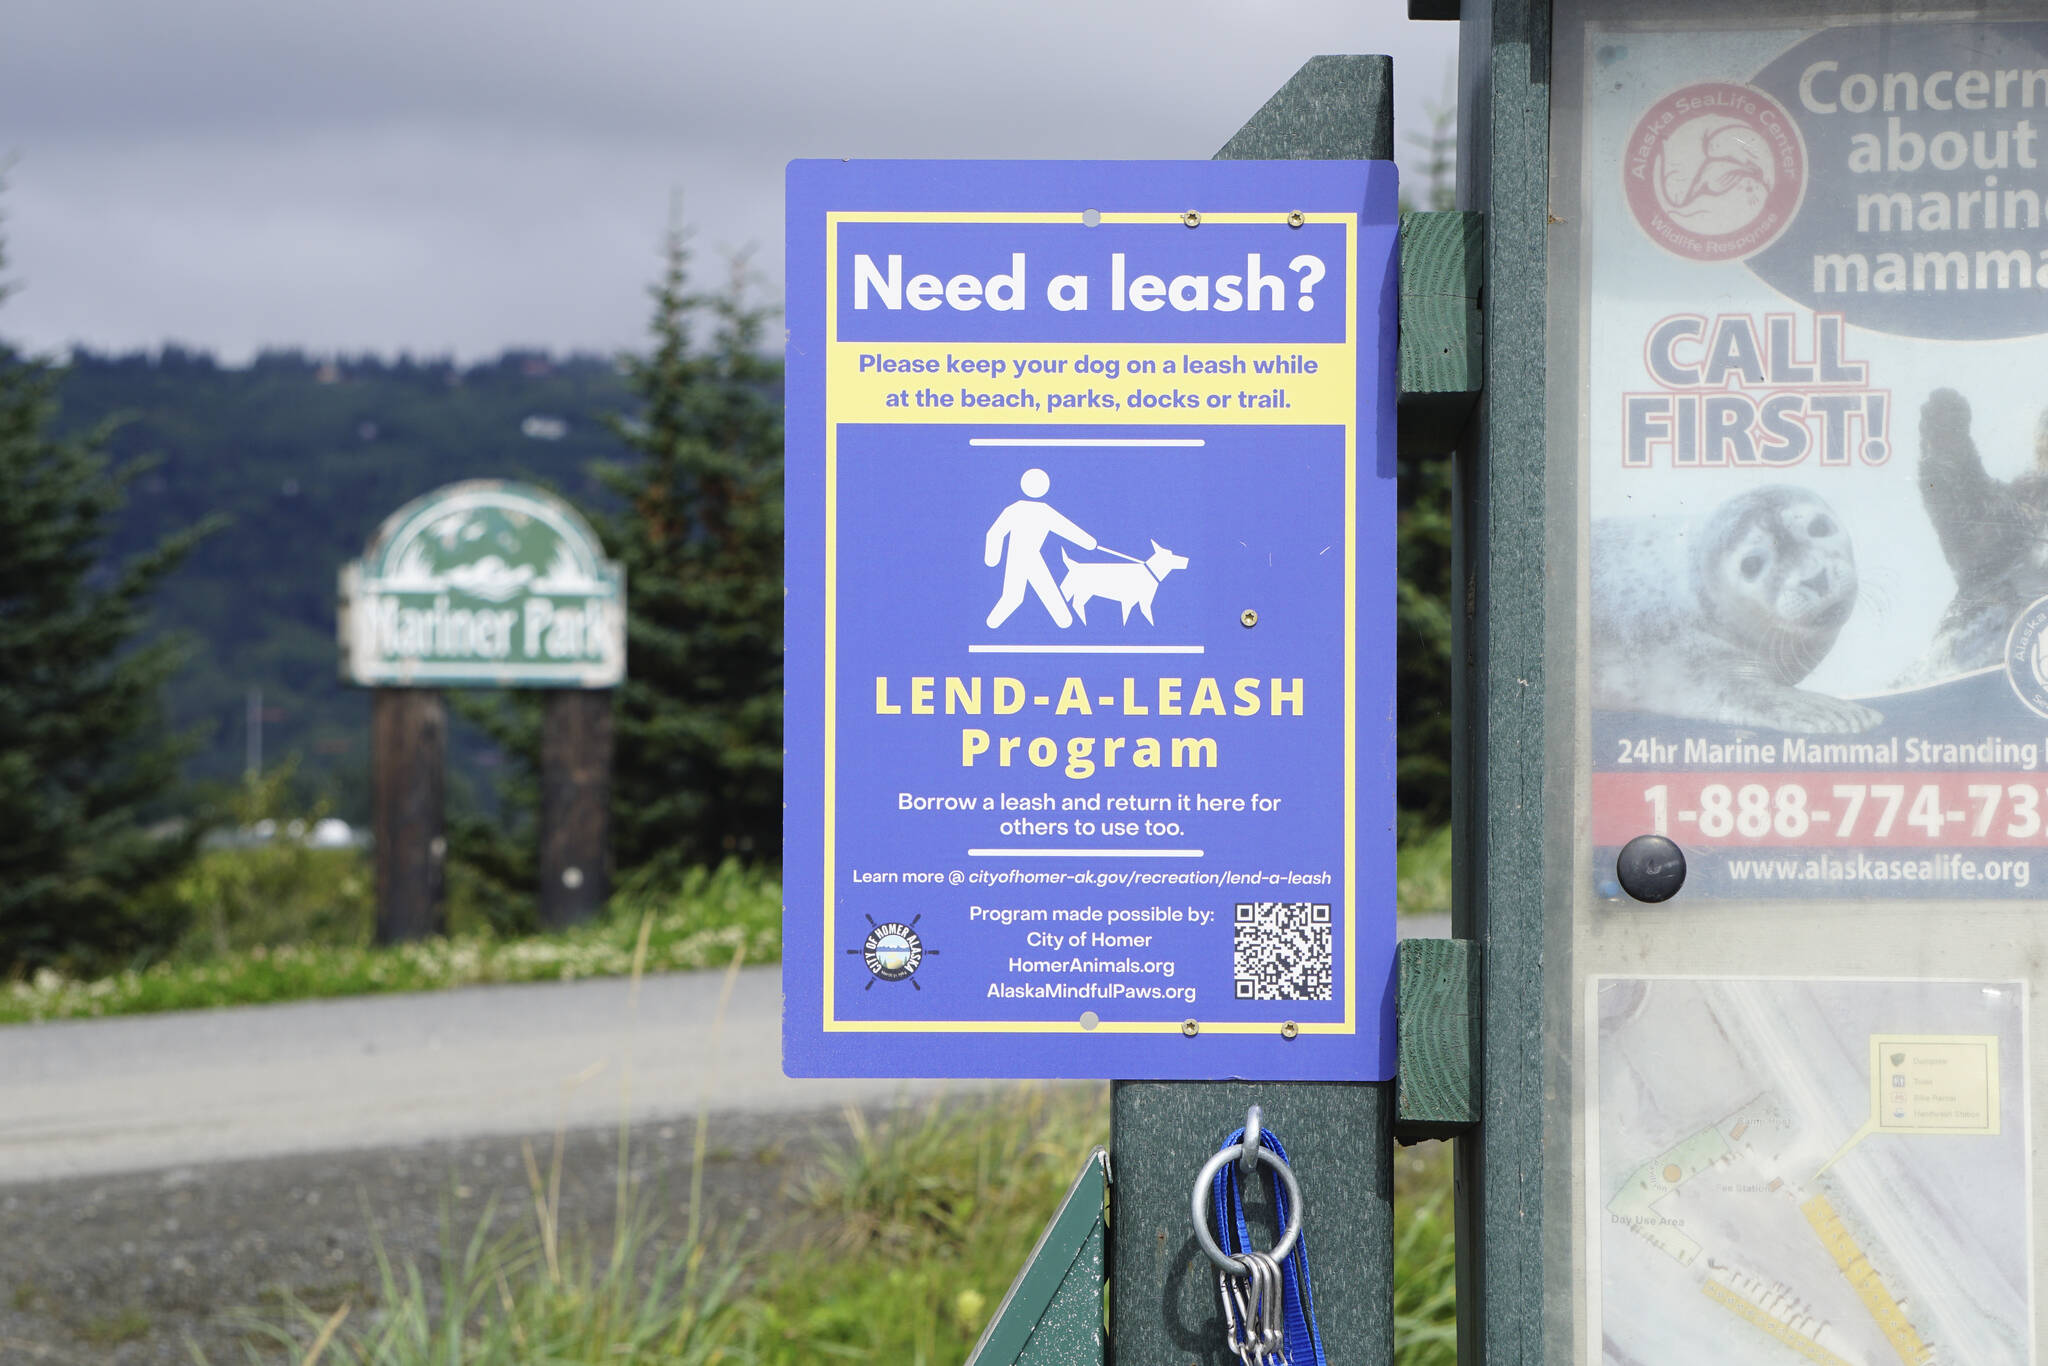 Leashes to lend hang from a kiosk at Mariner Park on Friday, Aug. 12, 2022, in Homer, Alaska. (Photo by Michael Armstrong/Homer News)